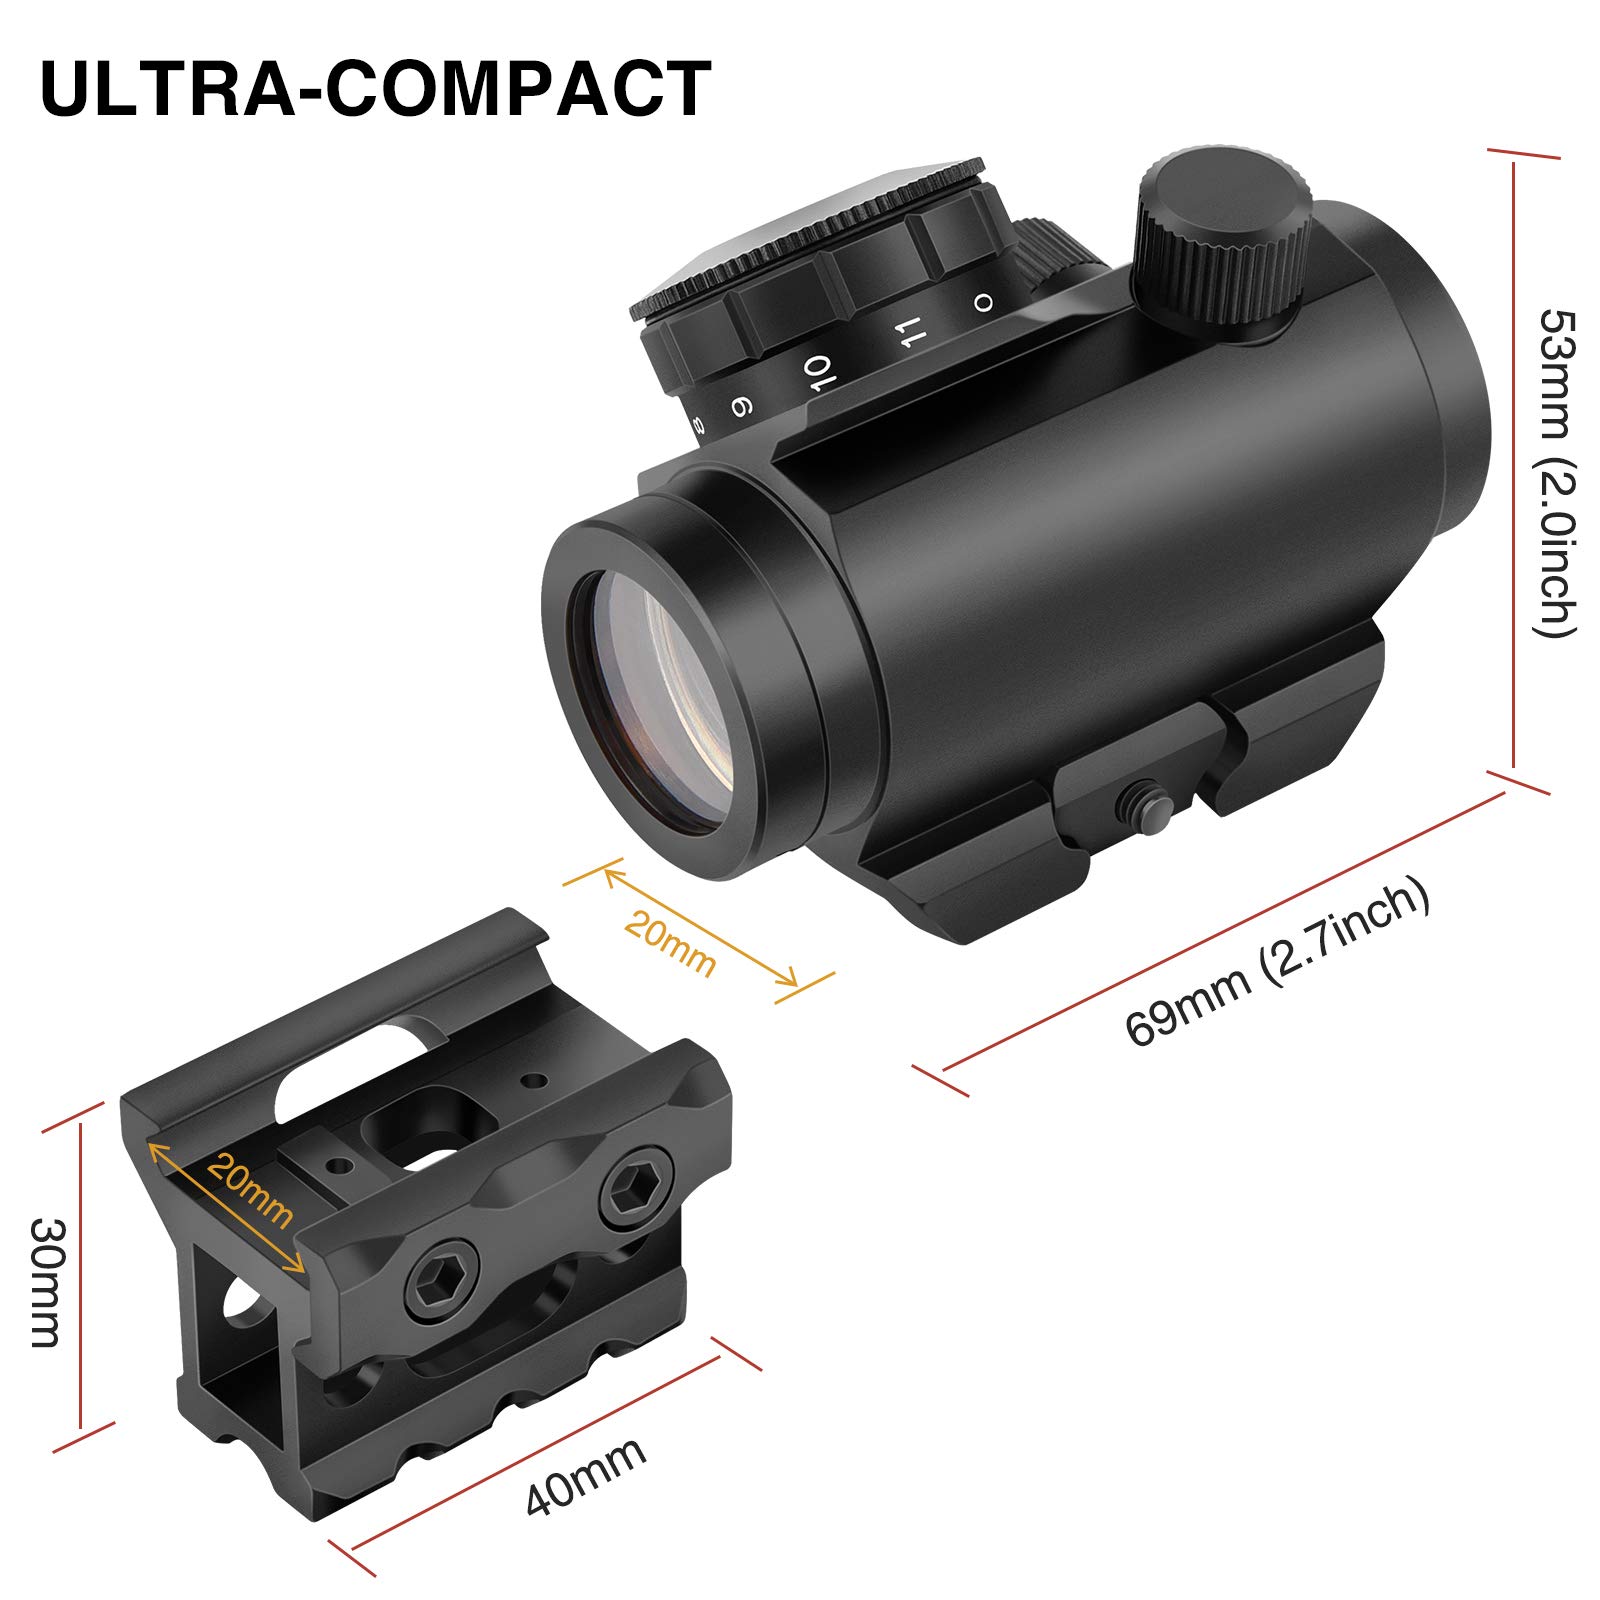 MidTen 2MOA Micro Red Dot Sight 1x25mm Reflex Sight Waterproof & Shockproof & Fog-Proof Red Dot Scope with 1 inch Riser Mount